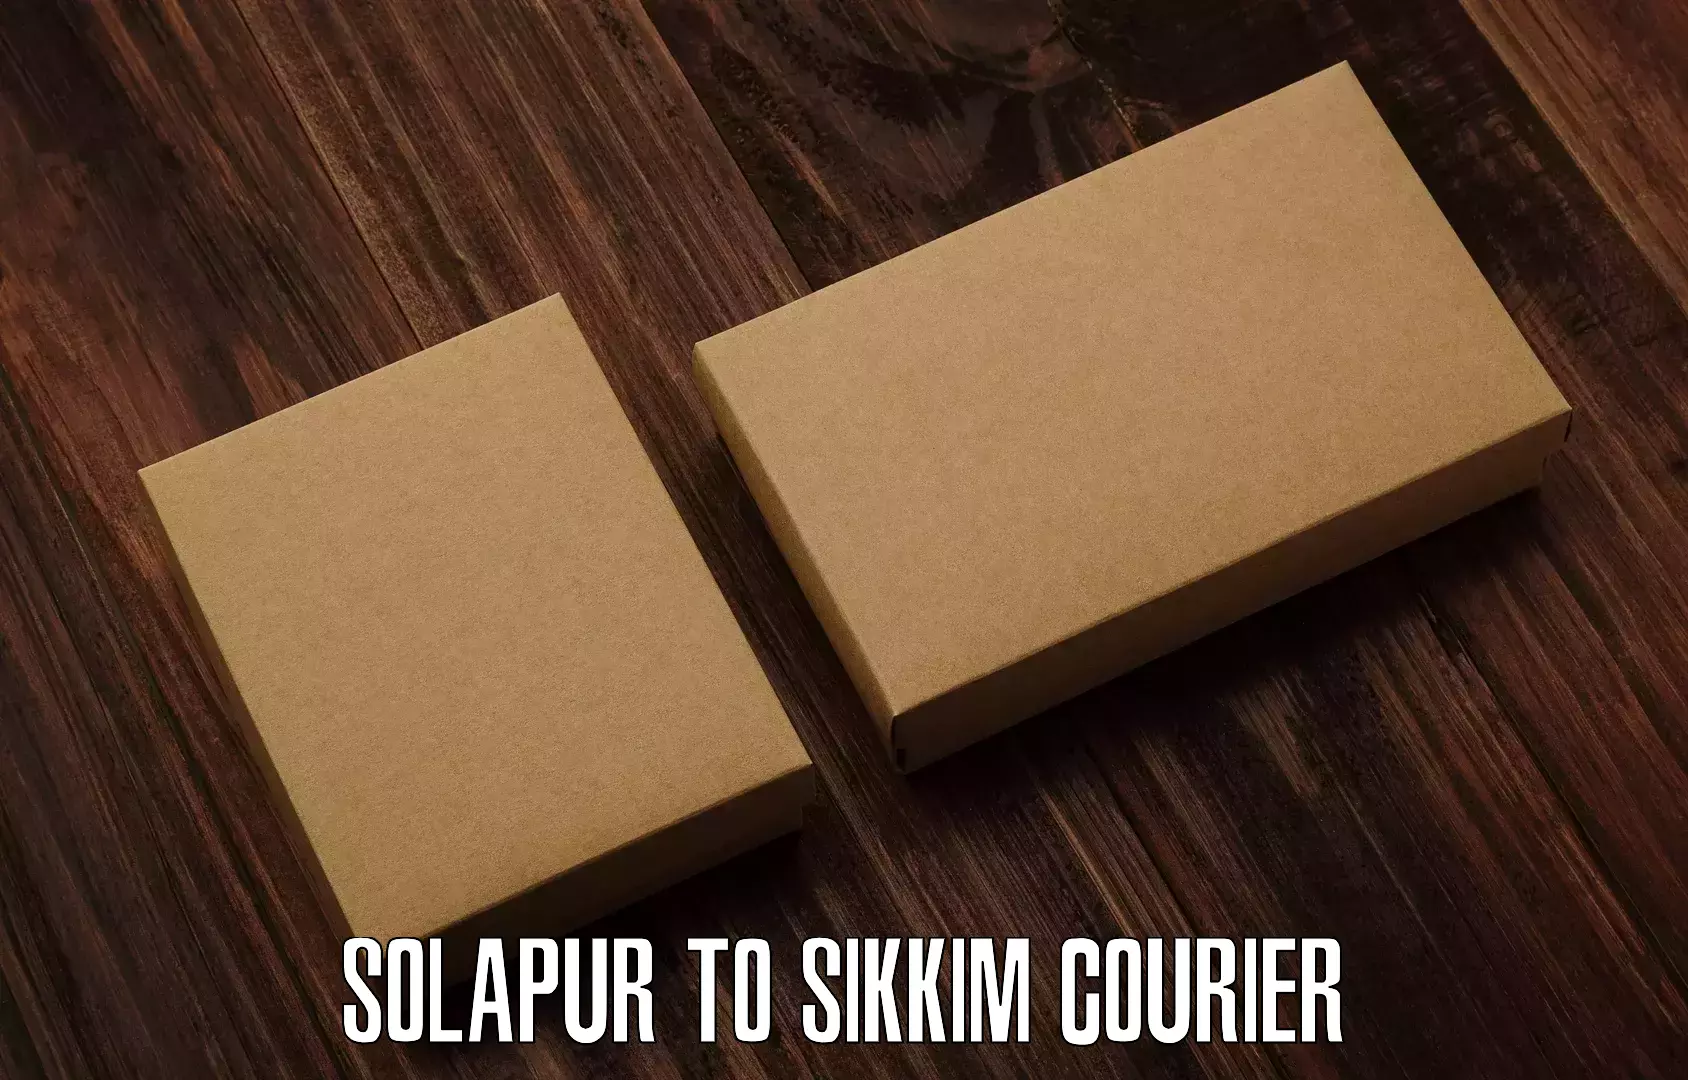 User-friendly delivery service Solapur to Sikkim